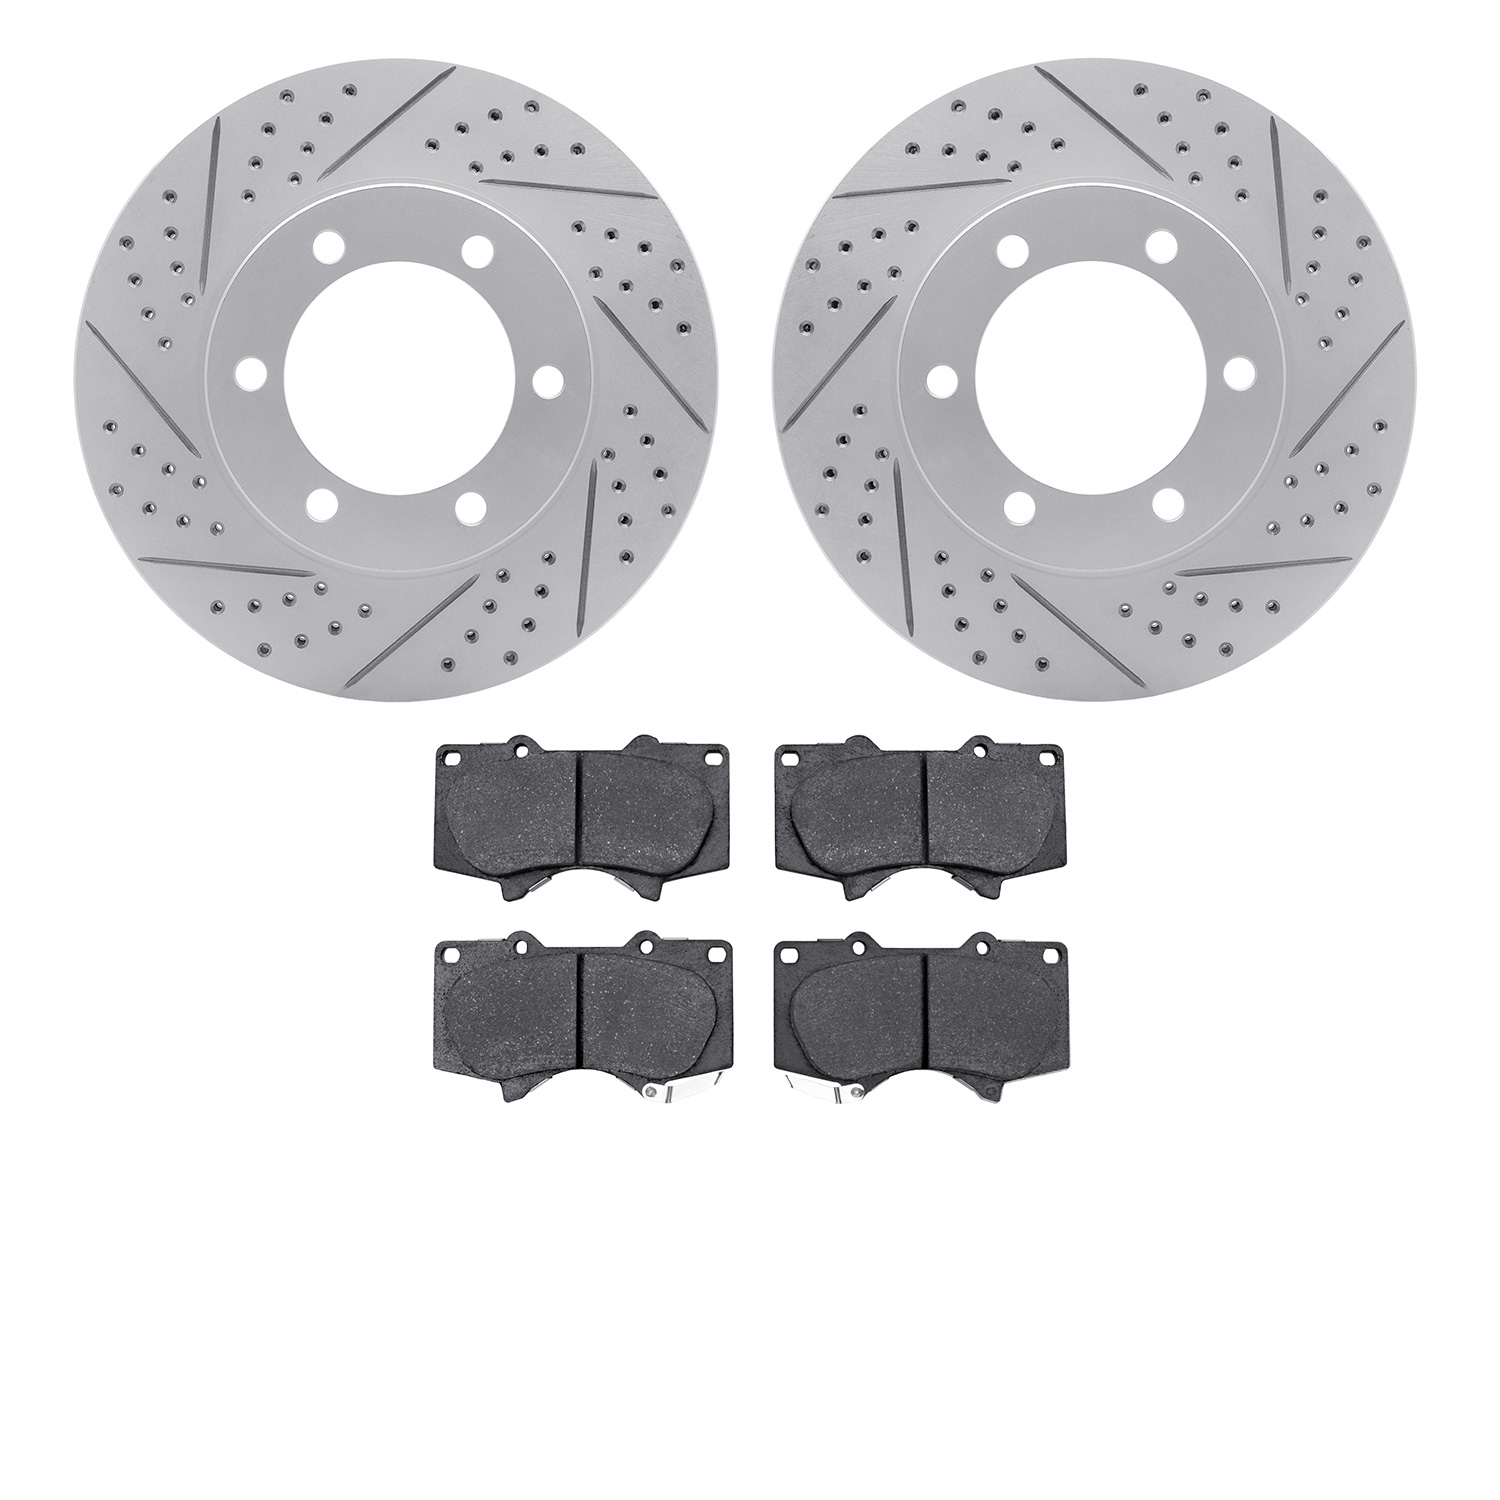 2502-76145 Geoperformance Drilled/Slotted Rotors w/5000 Advanced Brake Pads Kit, 2000-2007 Lexus/Toyota/Scion, Position: Front